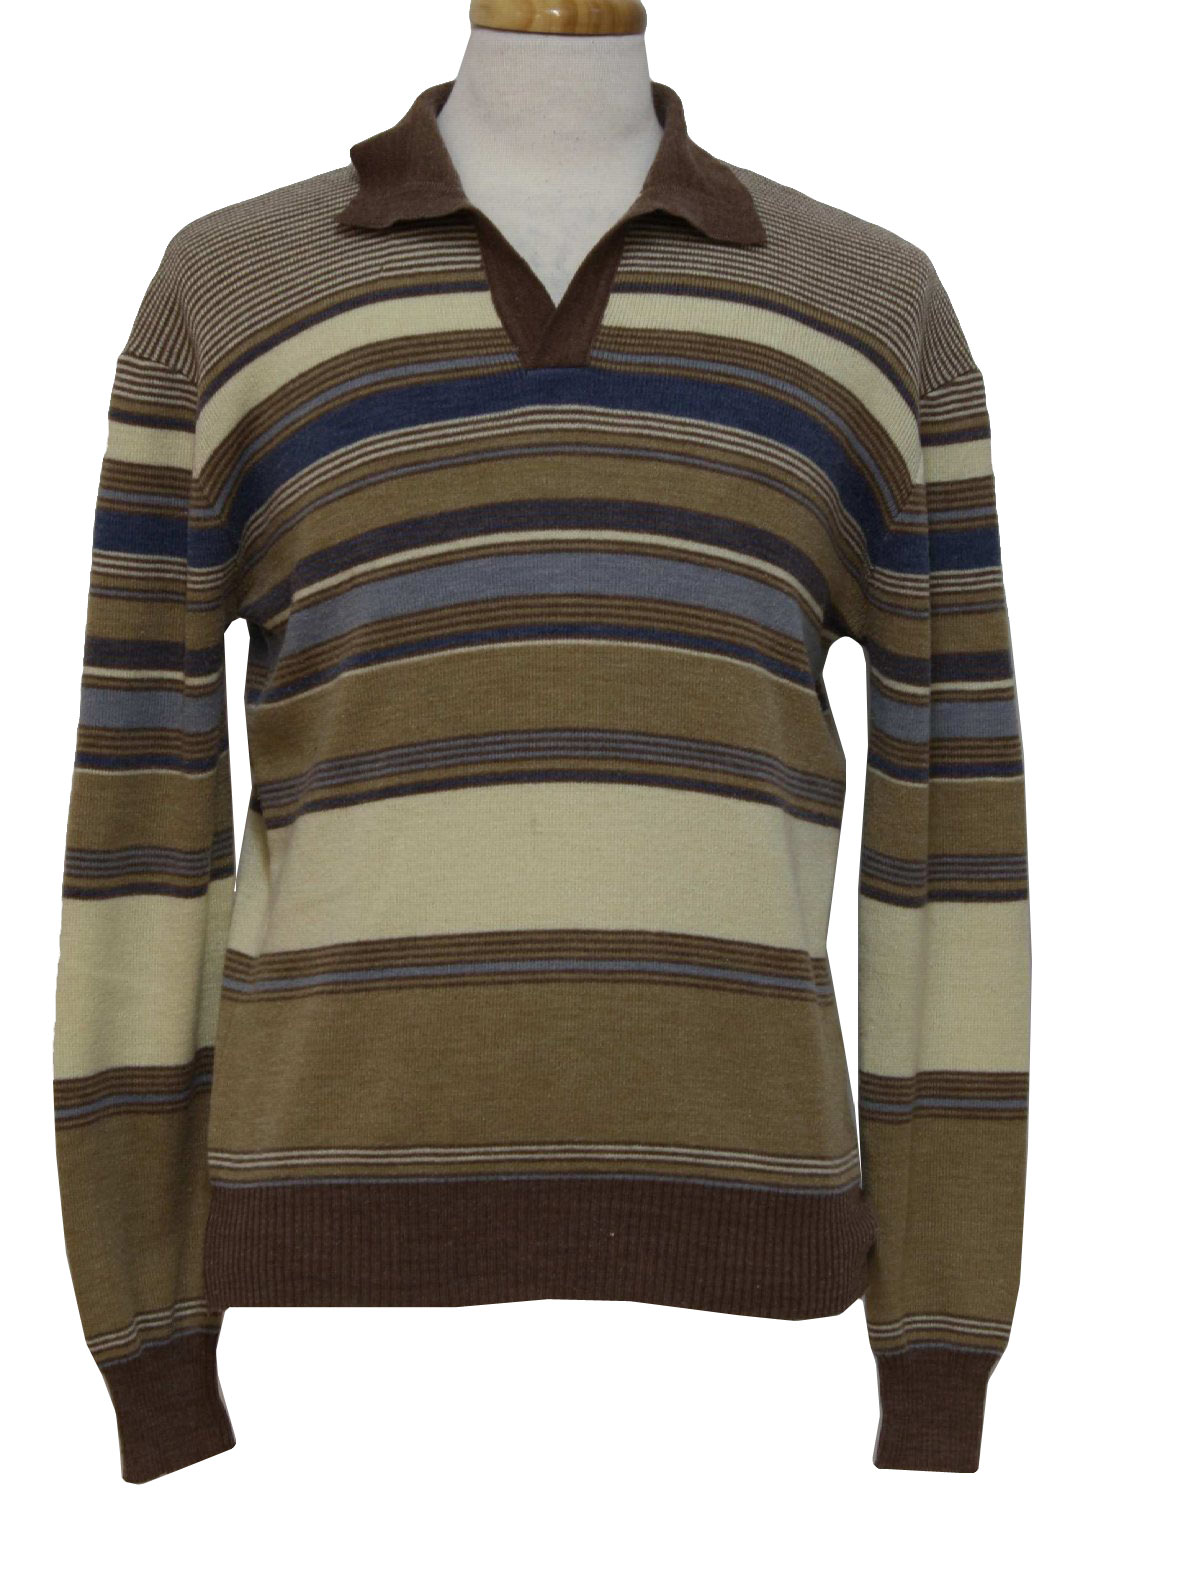 70's Vintage Knit Shirt: Late 70s or early 80s -166 Collection- Mens ...